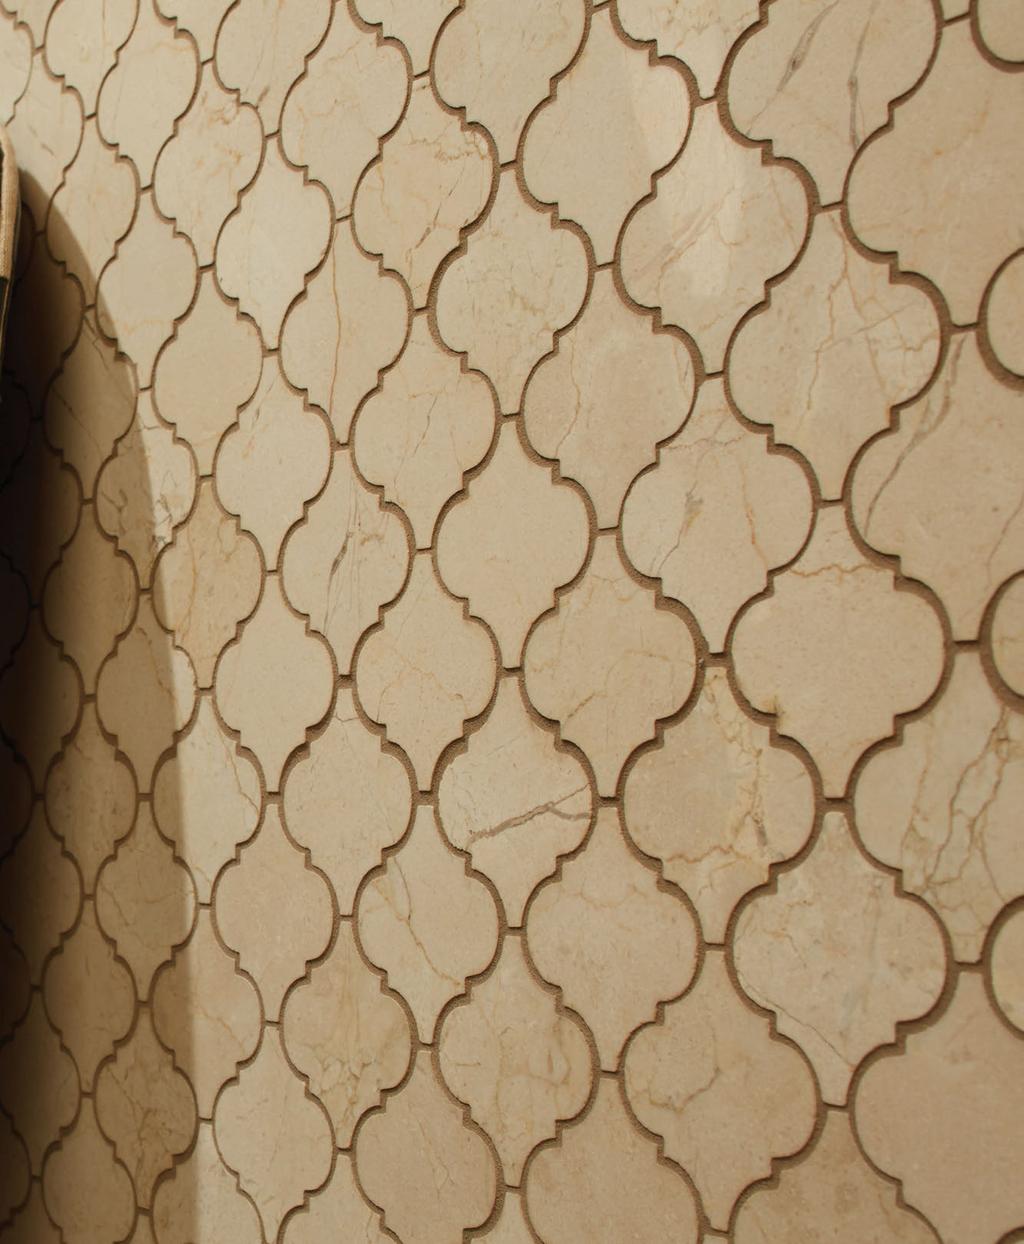 LINE UPDATES 99 Glazed Ceramic HEATHLAND Sizes Added for ALL Colors: Wall Tile: 4-1/4 x 4-1/4 Trim: S-4449, SCRL-4449 Sizes Added for HL05 & HL06 (already available for other colors) Wall Tile: 6 x 6